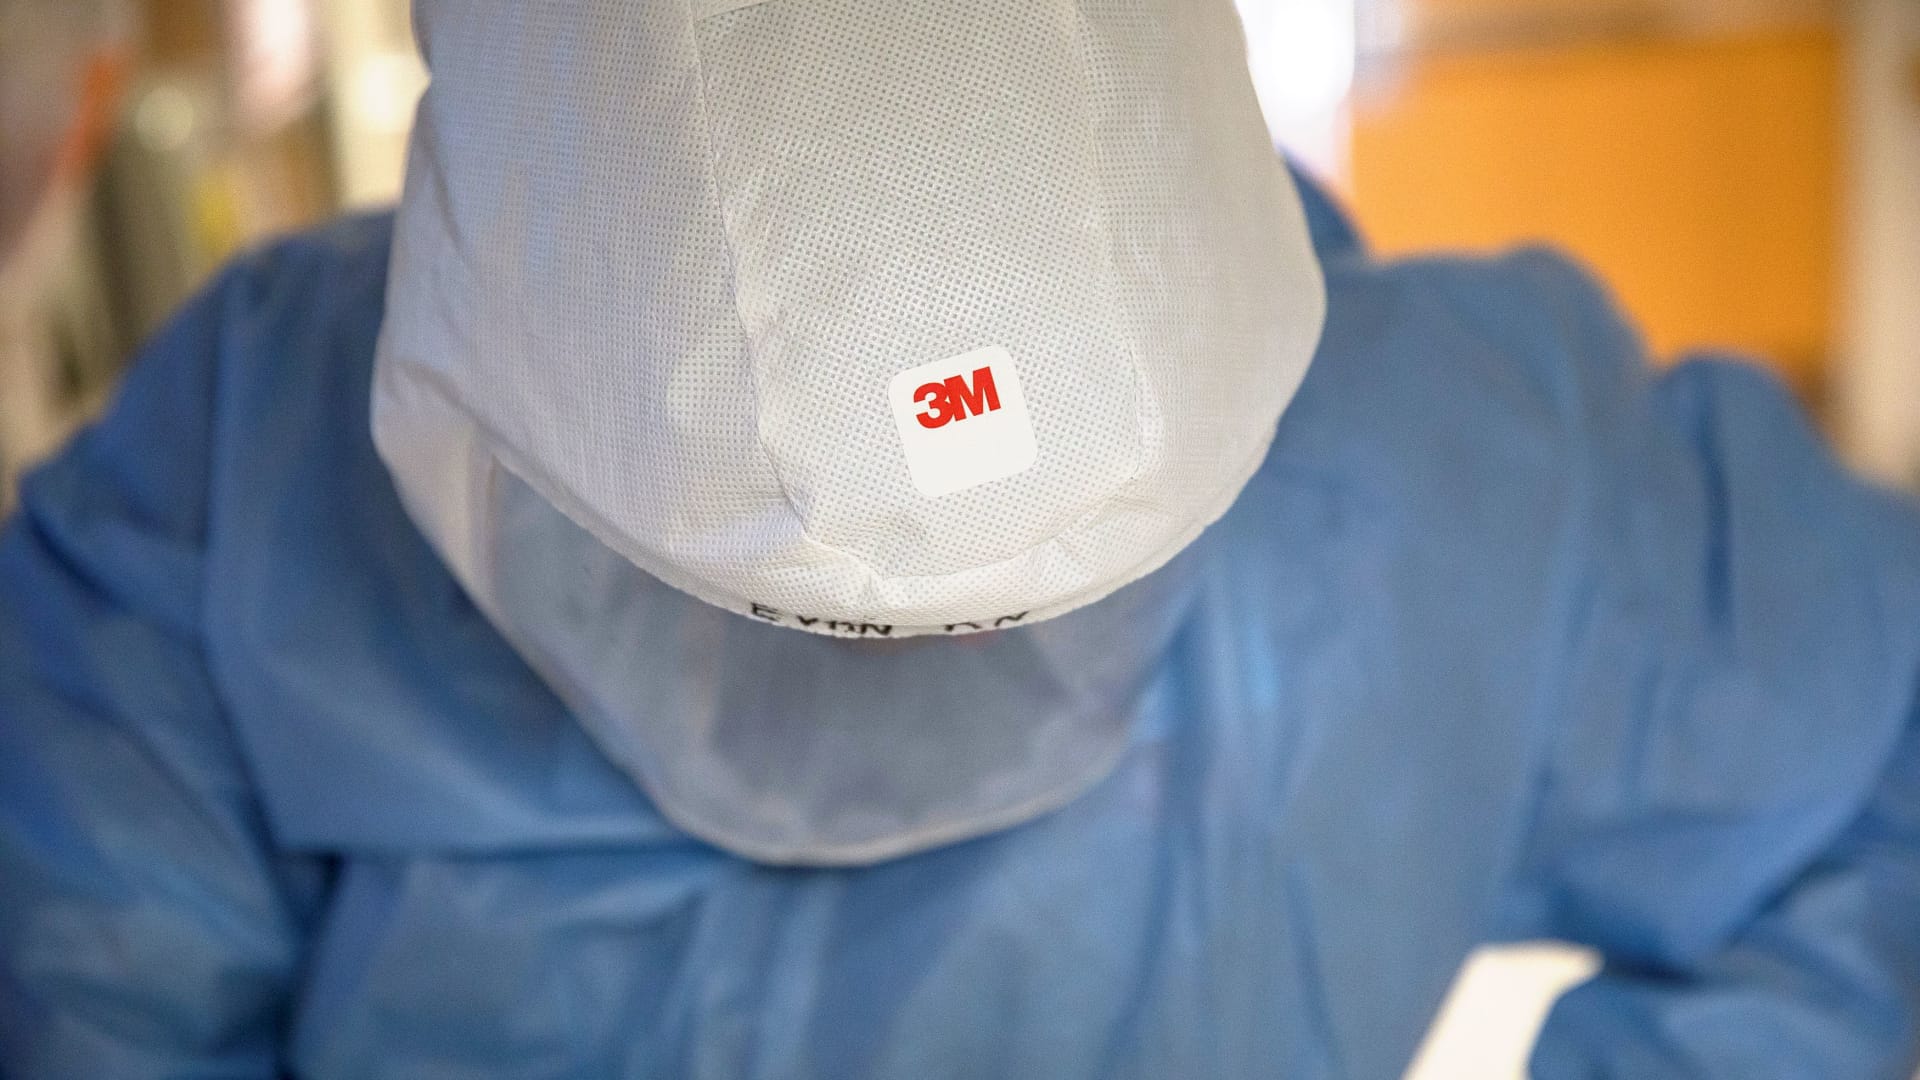 3M will spin off its health-care business into a new public company